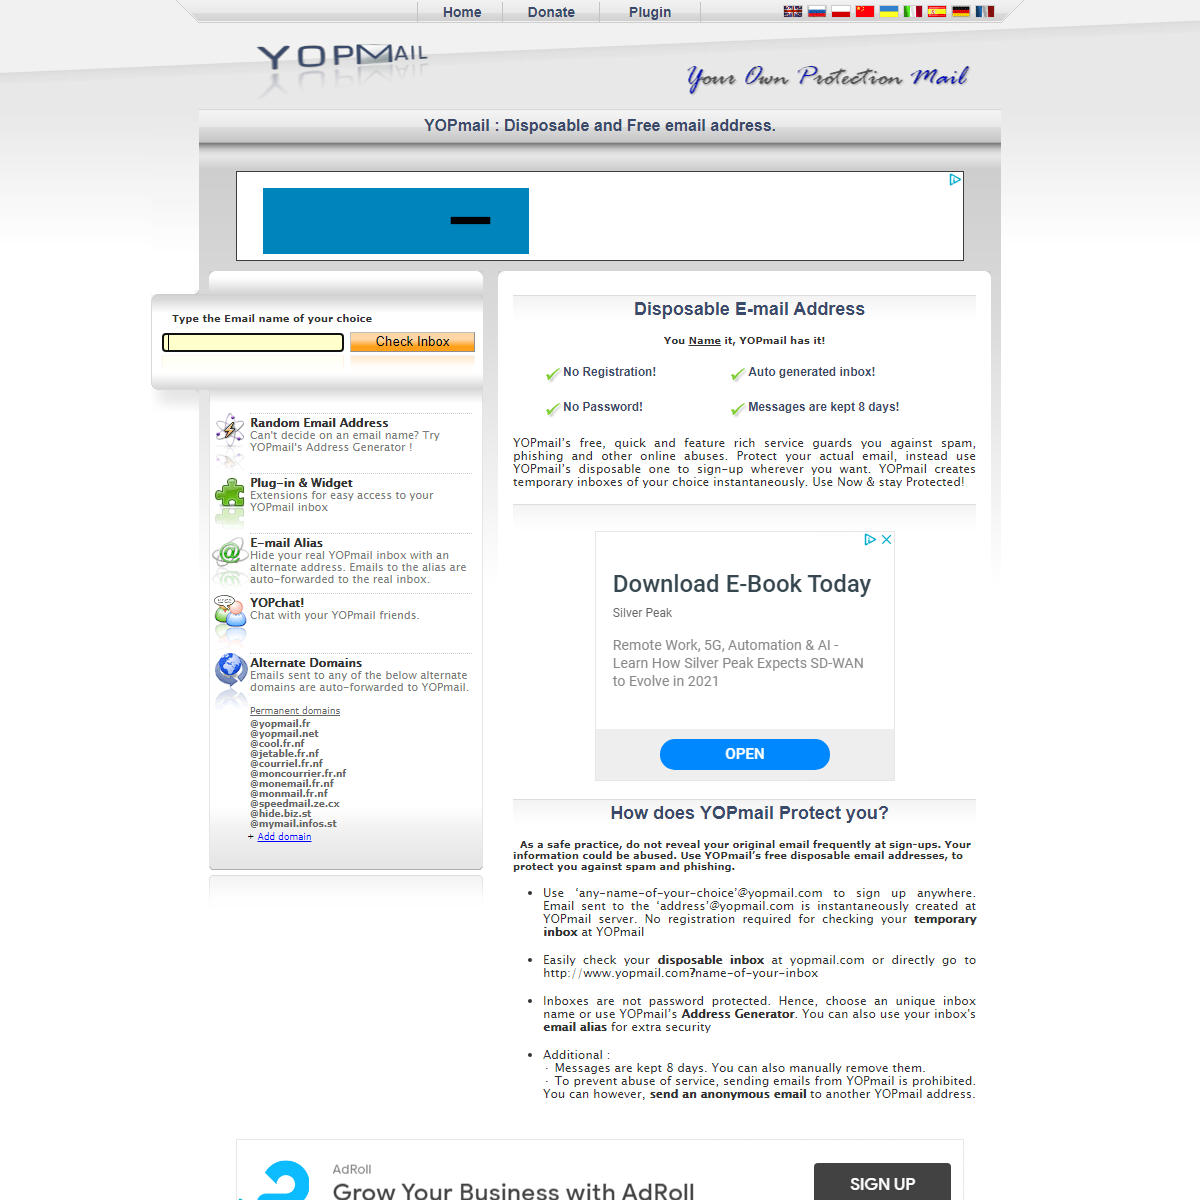 A complete backup of http://www.yopmail.com/